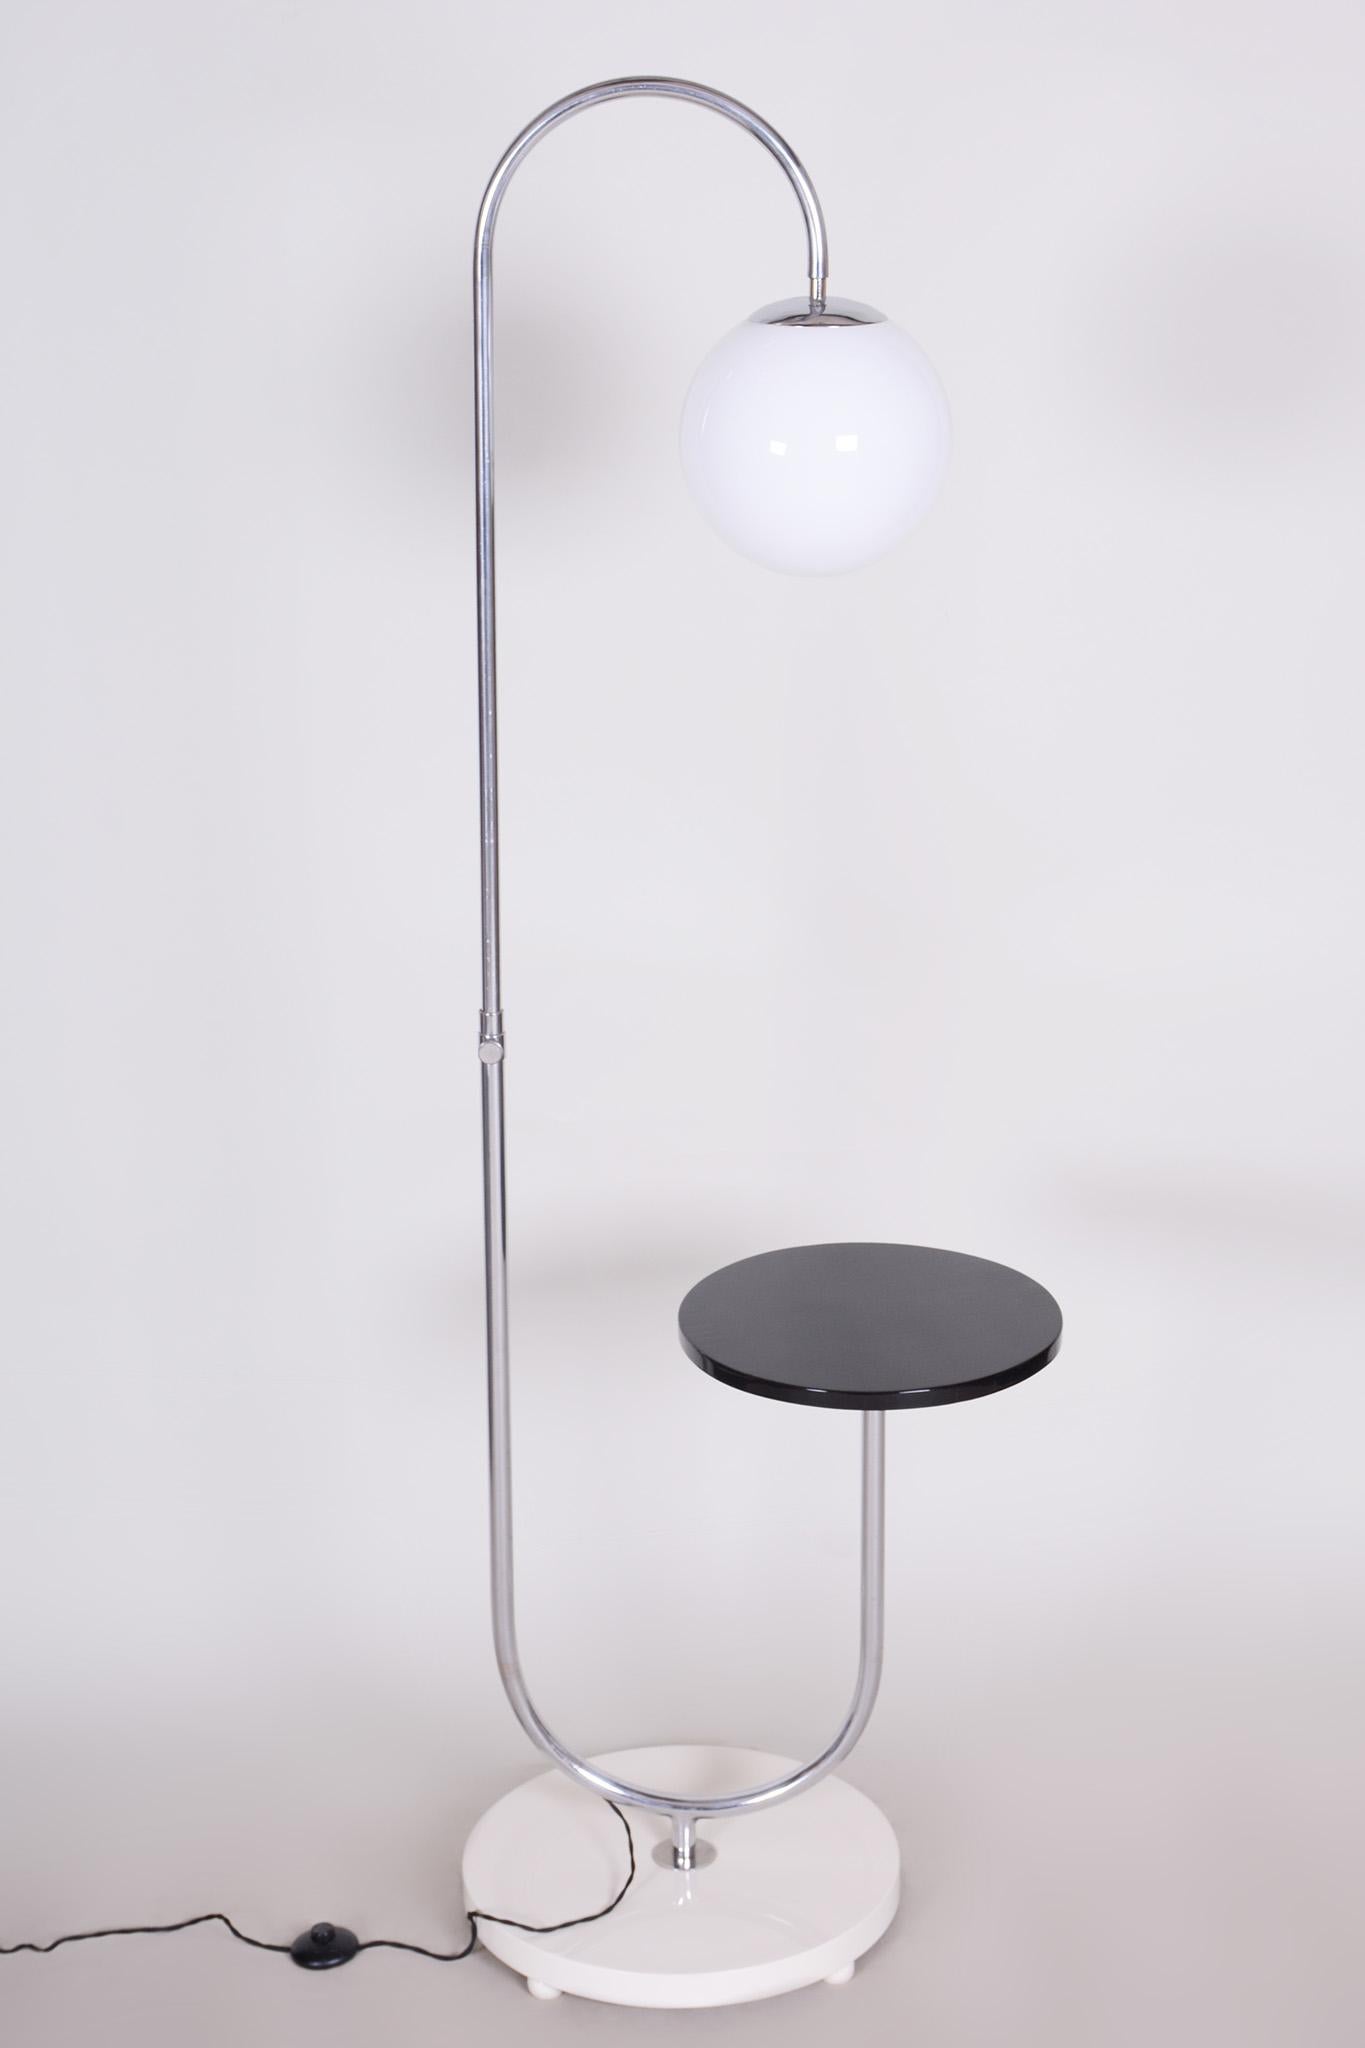 Milk Glass Art Deco Floor Lamp Made 30s, Designed by Halabala, Made by UP Závody, Restored For Sale